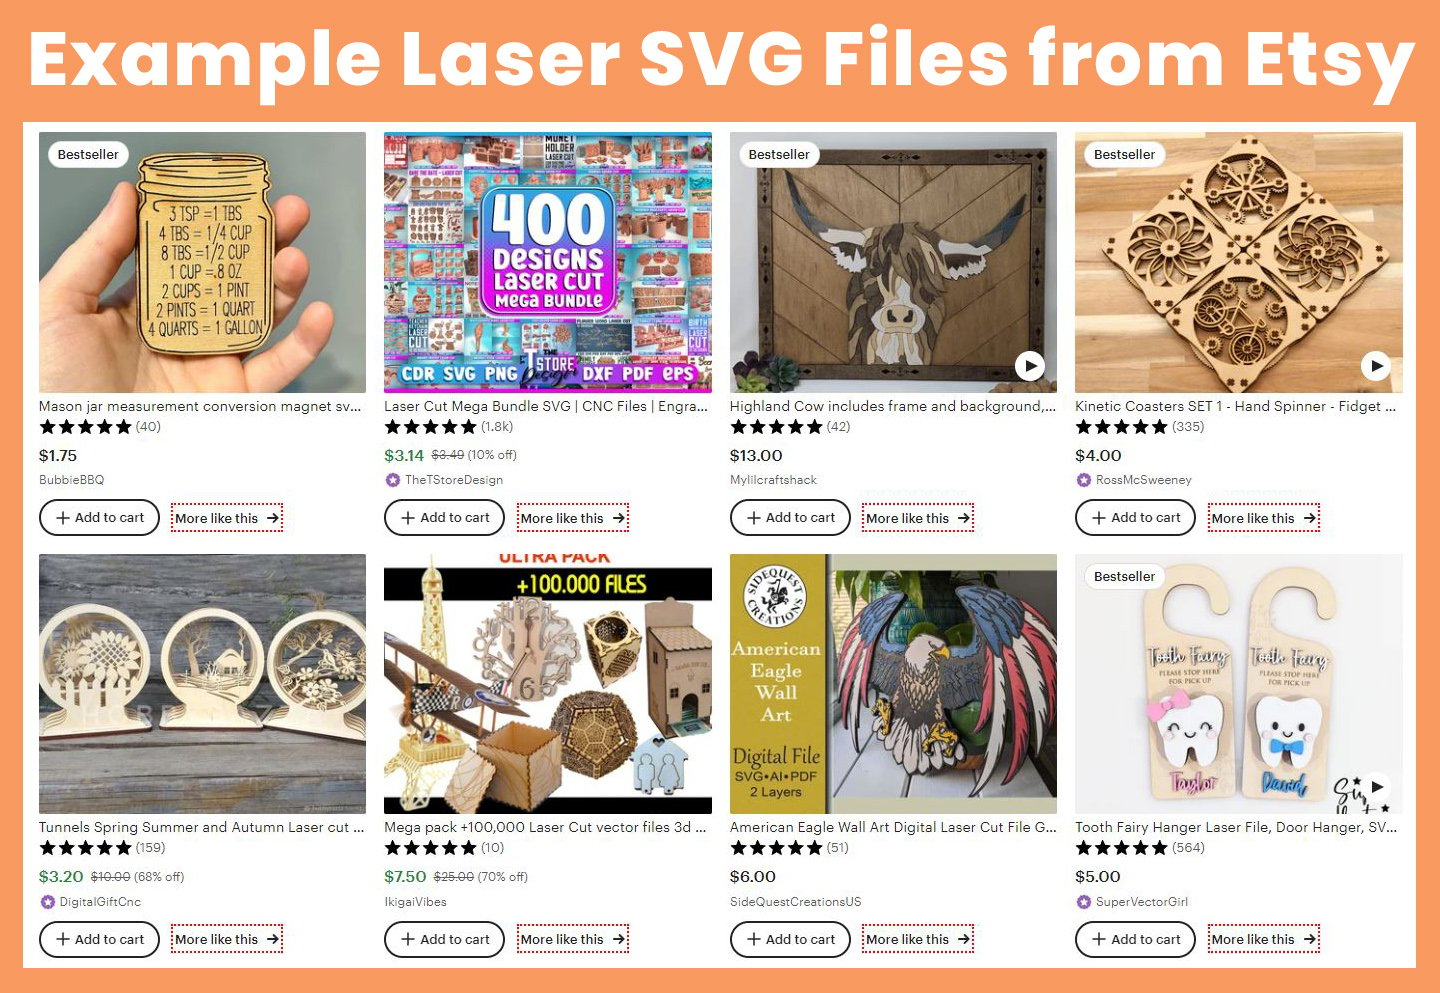 "Example Laser SVG Files from Etsy" graphic with collage of laser file images on orange background